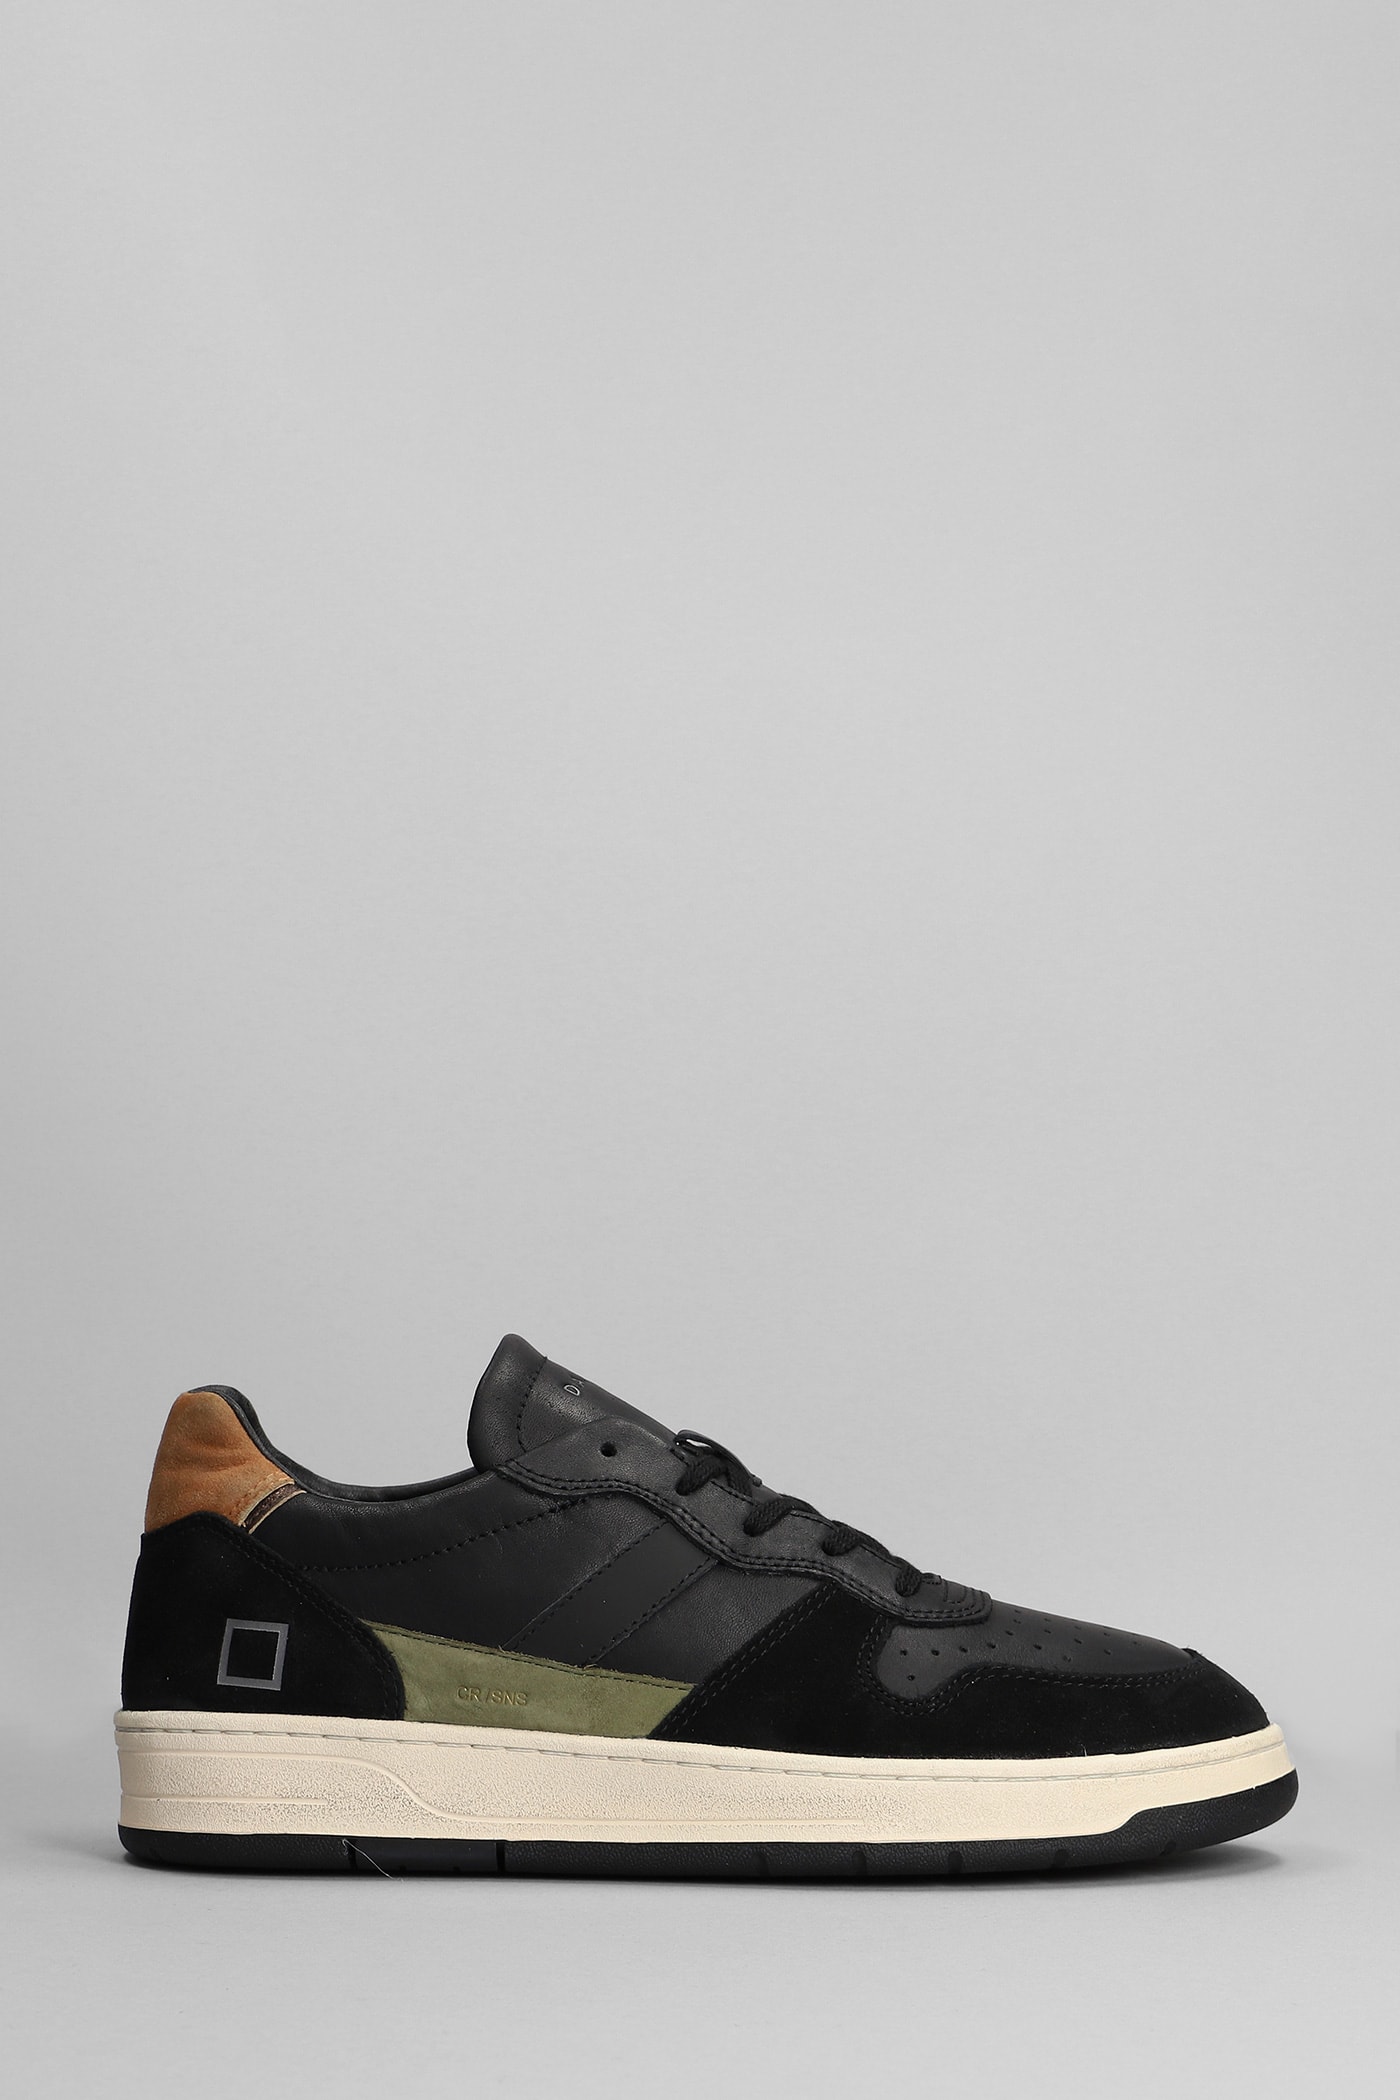 D.A.T.E. Curt 2.0 Sneakers In Black Suede And Leather